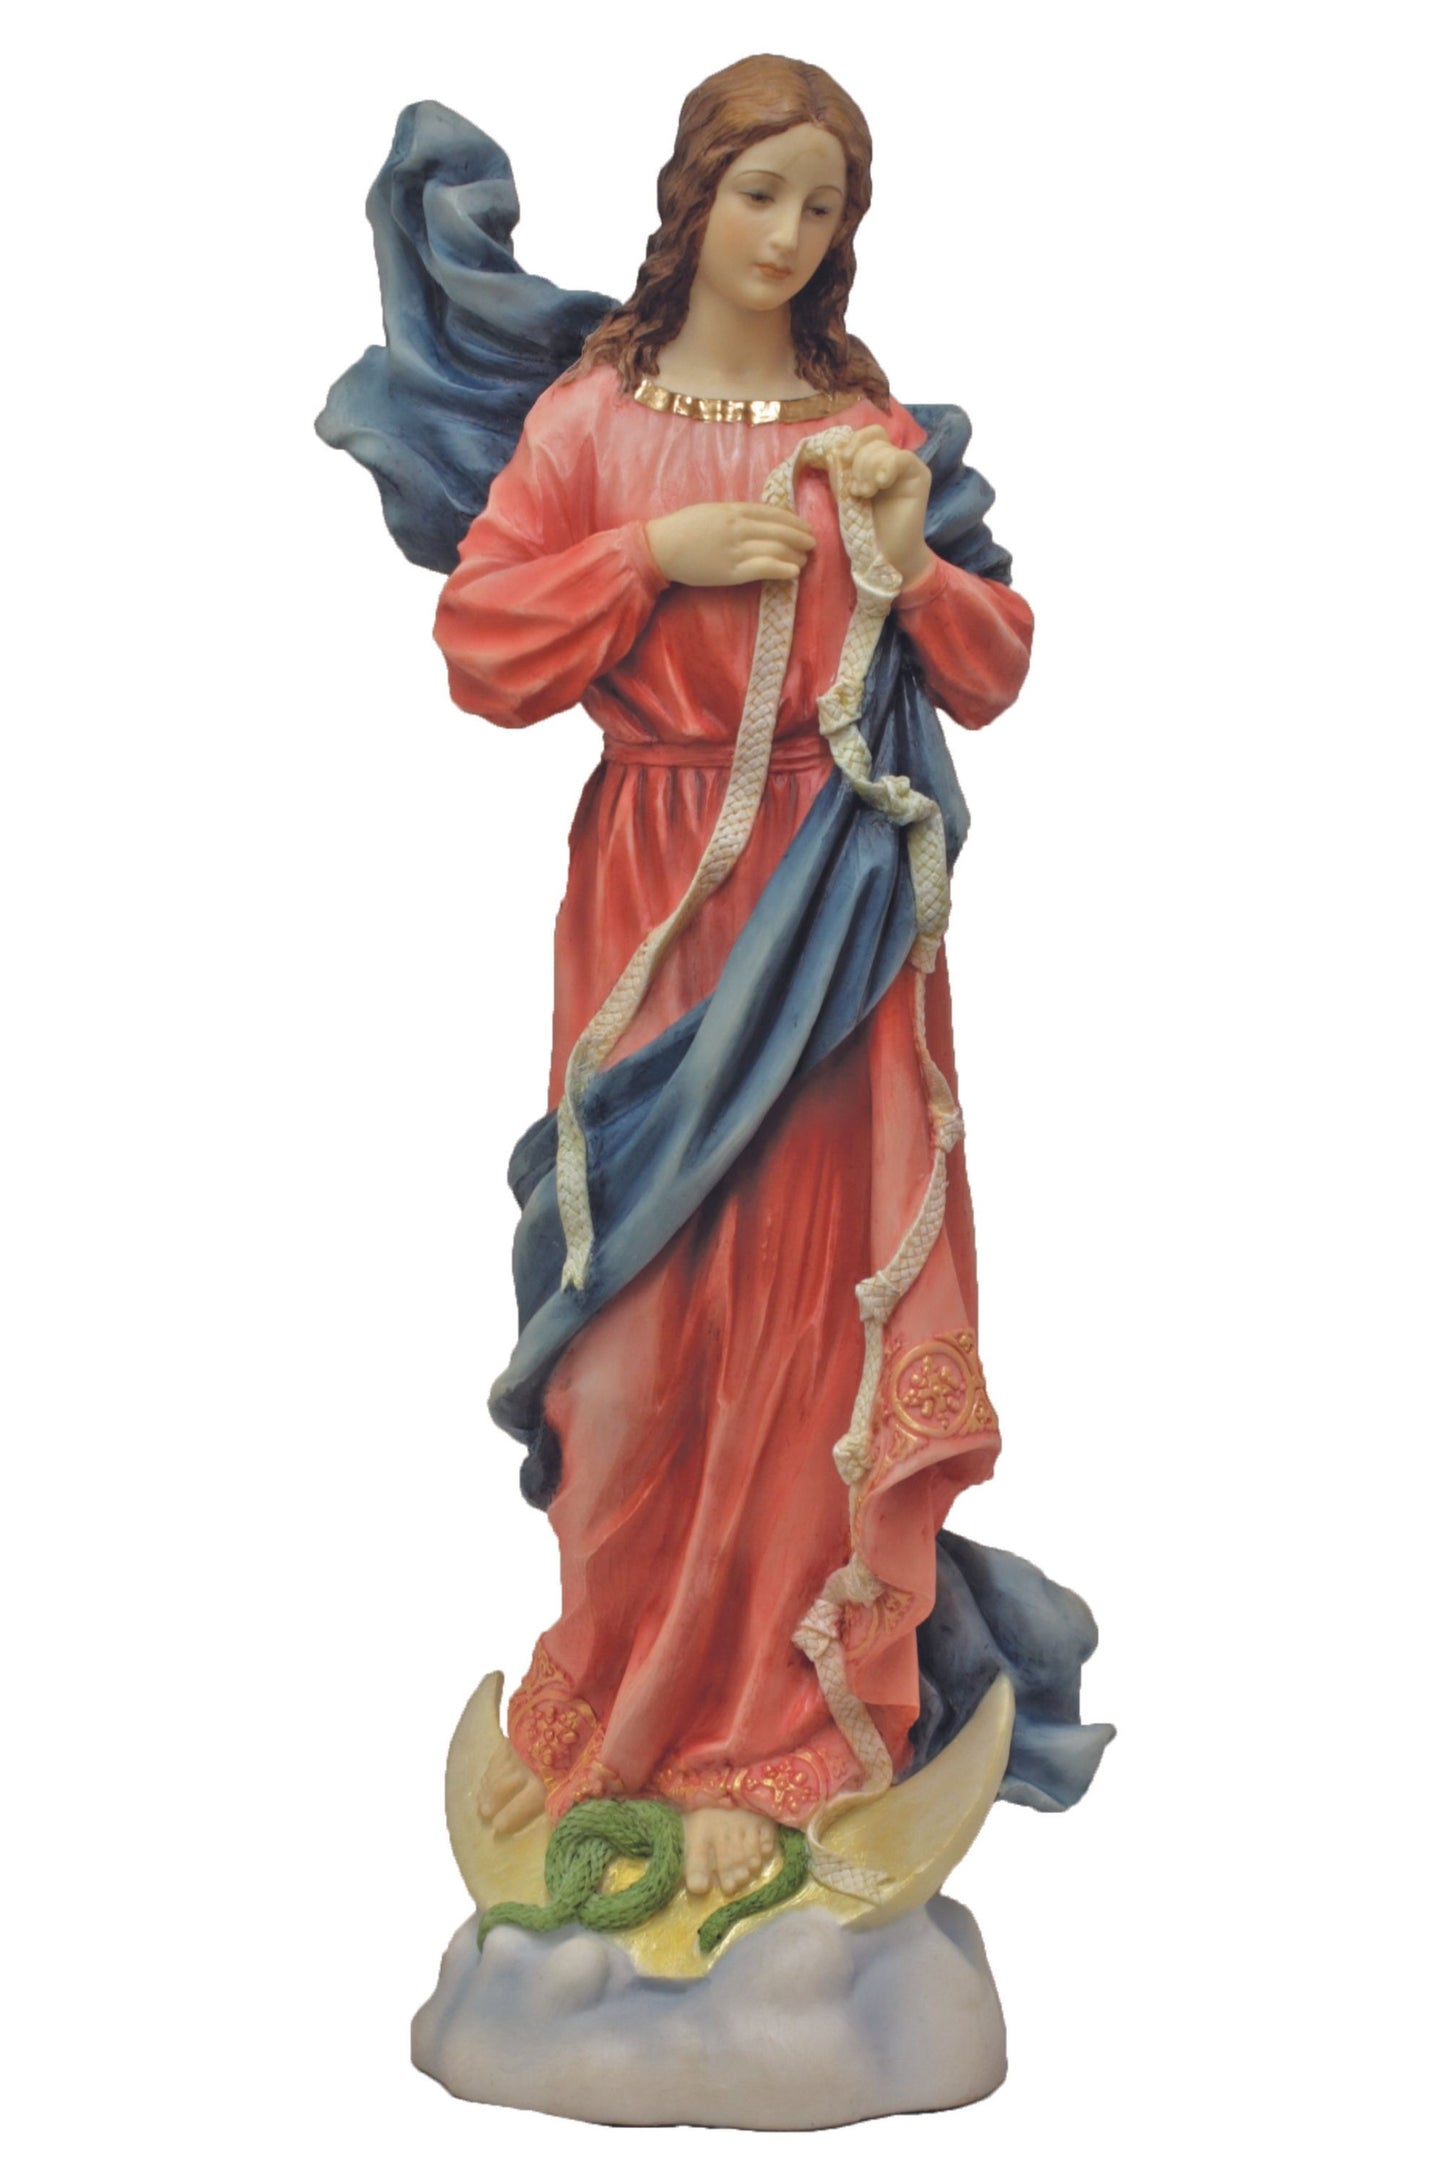 SR-76646-C Our Lady Undoer of Knots in Color 8"